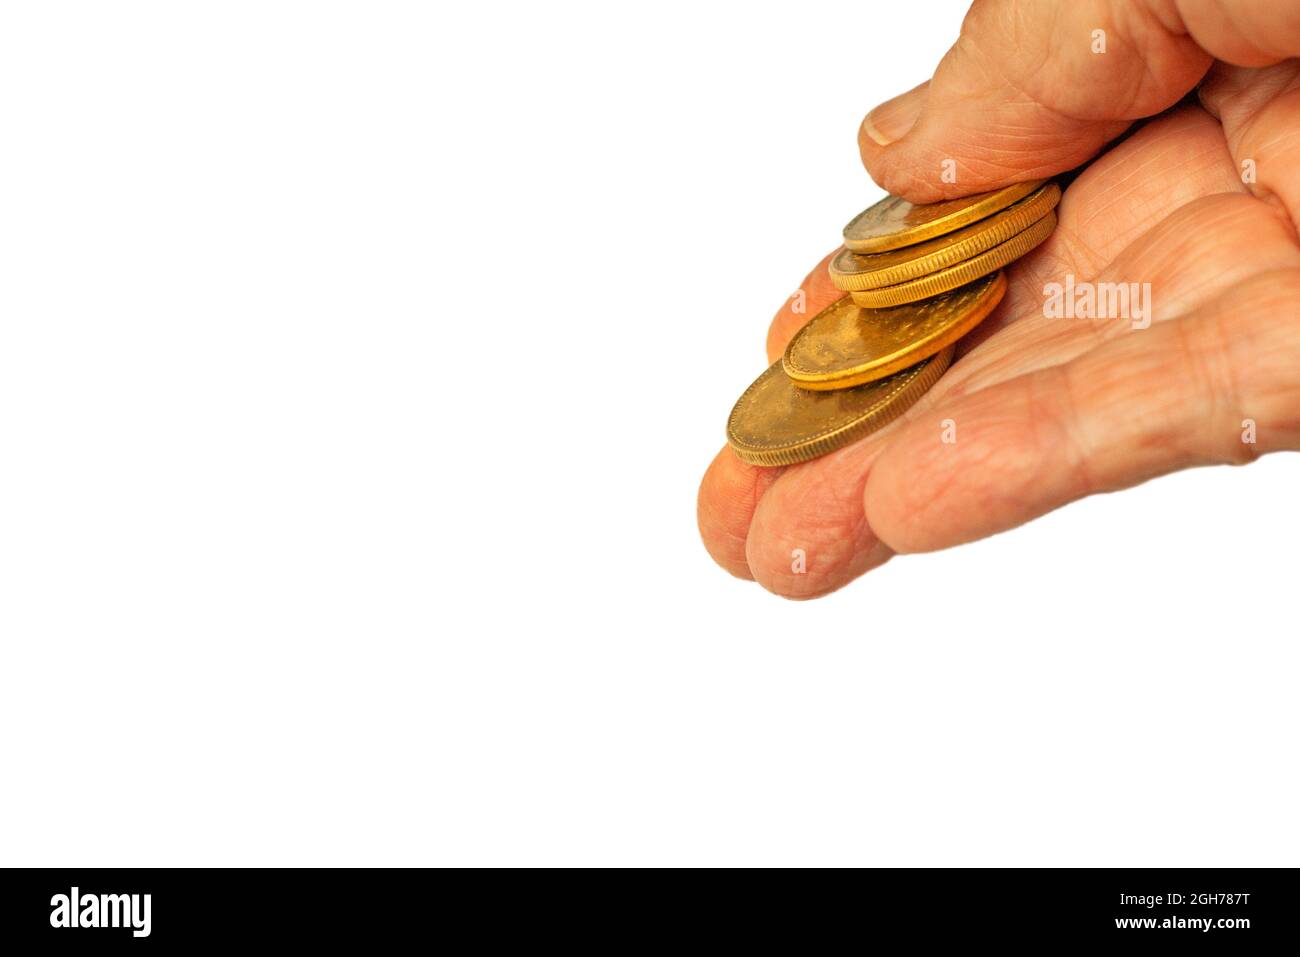 Gold crypto currency or blank yellow coins in fingers of mature hand isolated. A few coins are given, dropped , spent, saved or displayed. Stock Photo